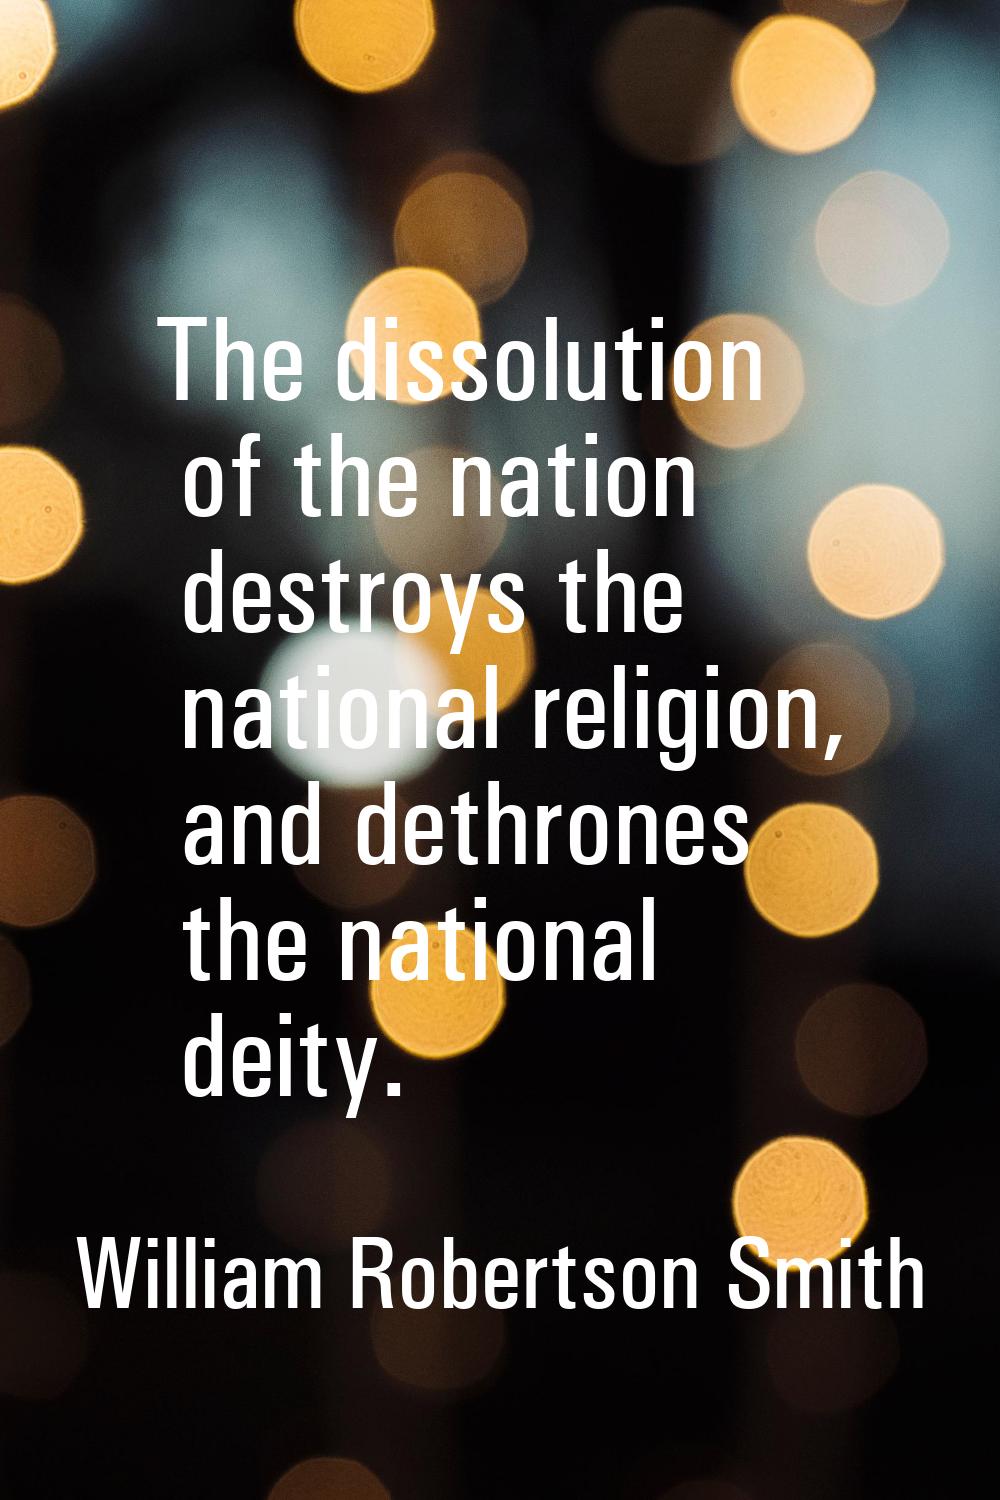 The dissolution of the nation destroys the national religion, and dethrones the national deity.